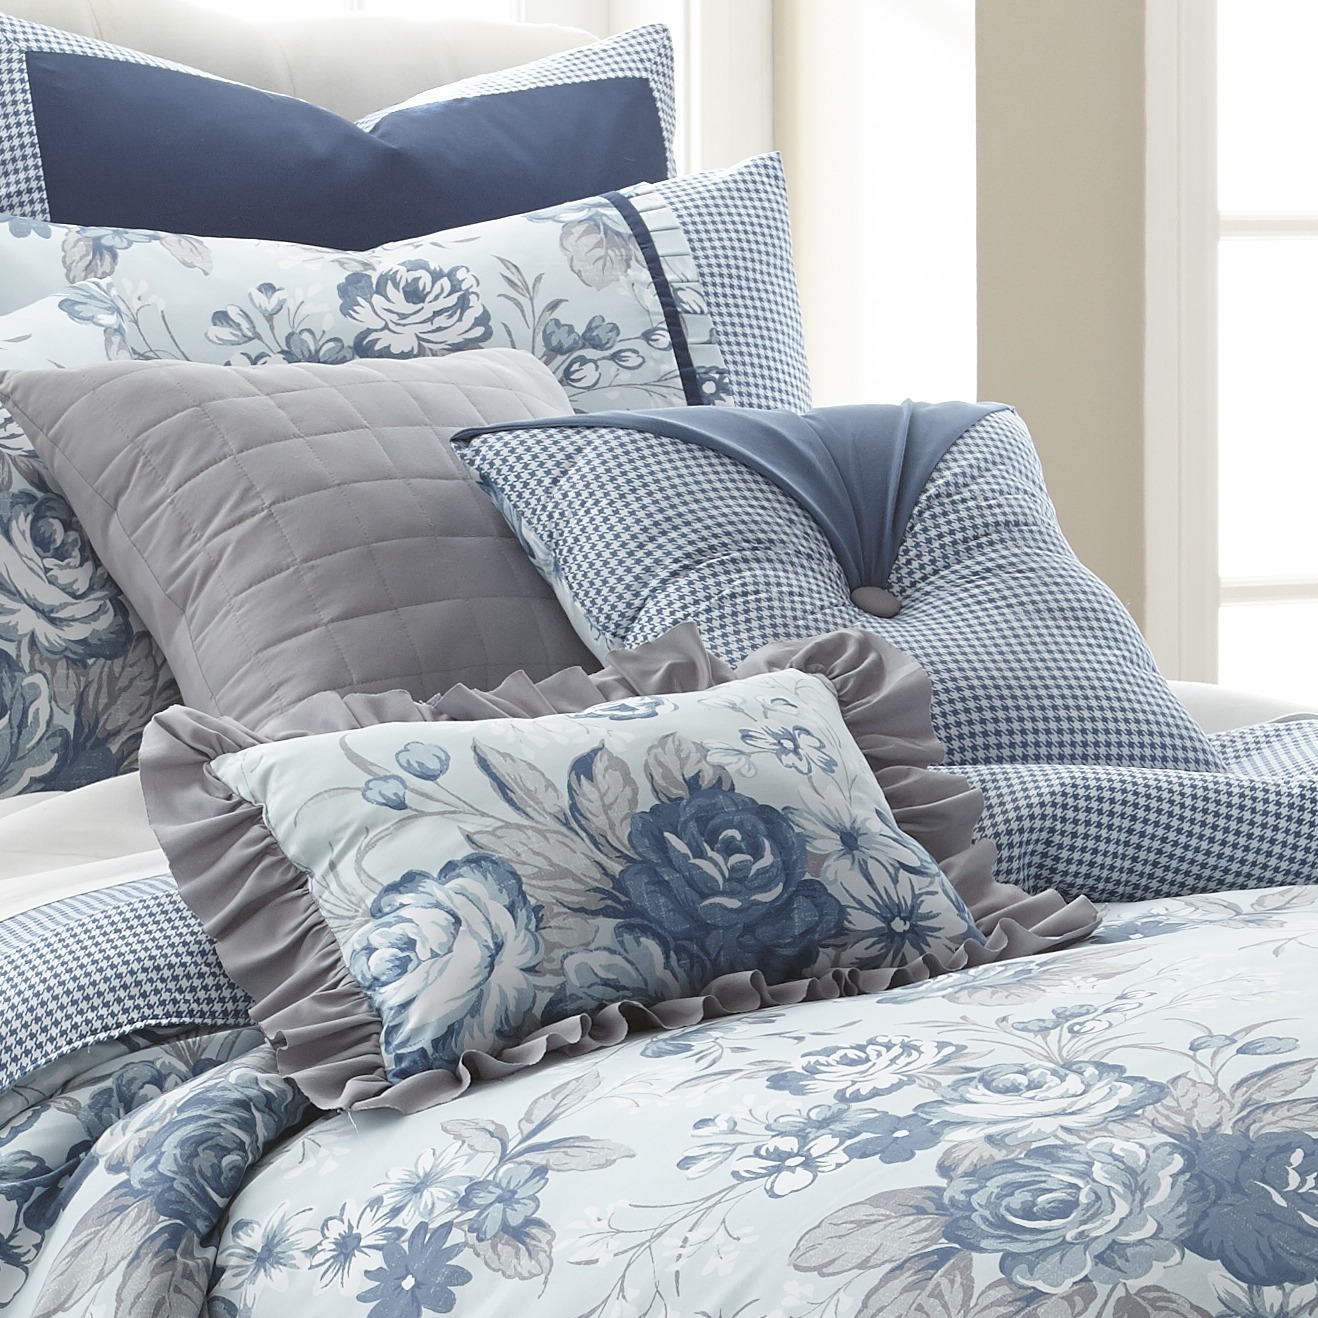 Modern Threads Floral Farmhouse 8-Piece Adult Comforter Set, King - image 2 of 4